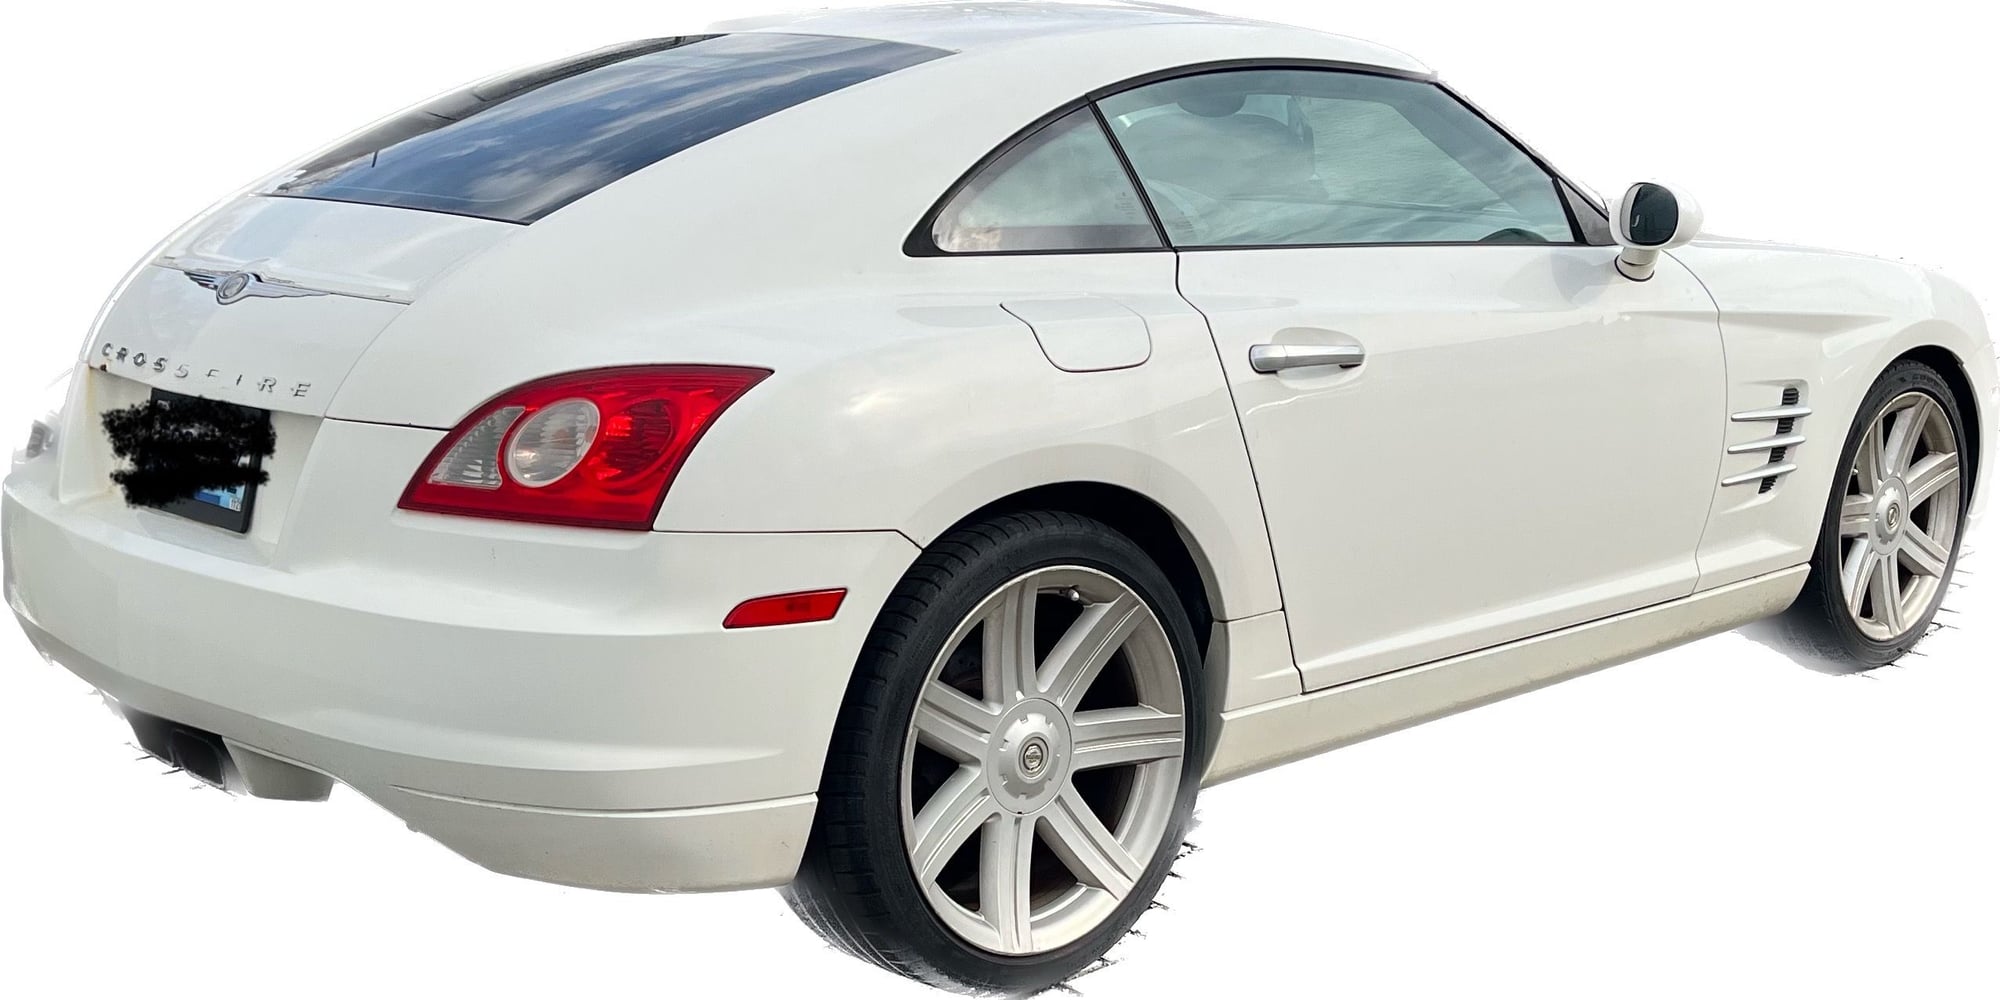 2004 Chrysler Crossfire - 2004 Chrysler Crossfire - Used - VIN 1C3AN69L94X012915 - 151,900 Miles - 6 cyl - 2WD - Automatic - Coupe - White - Lexington, KY 40513, United States